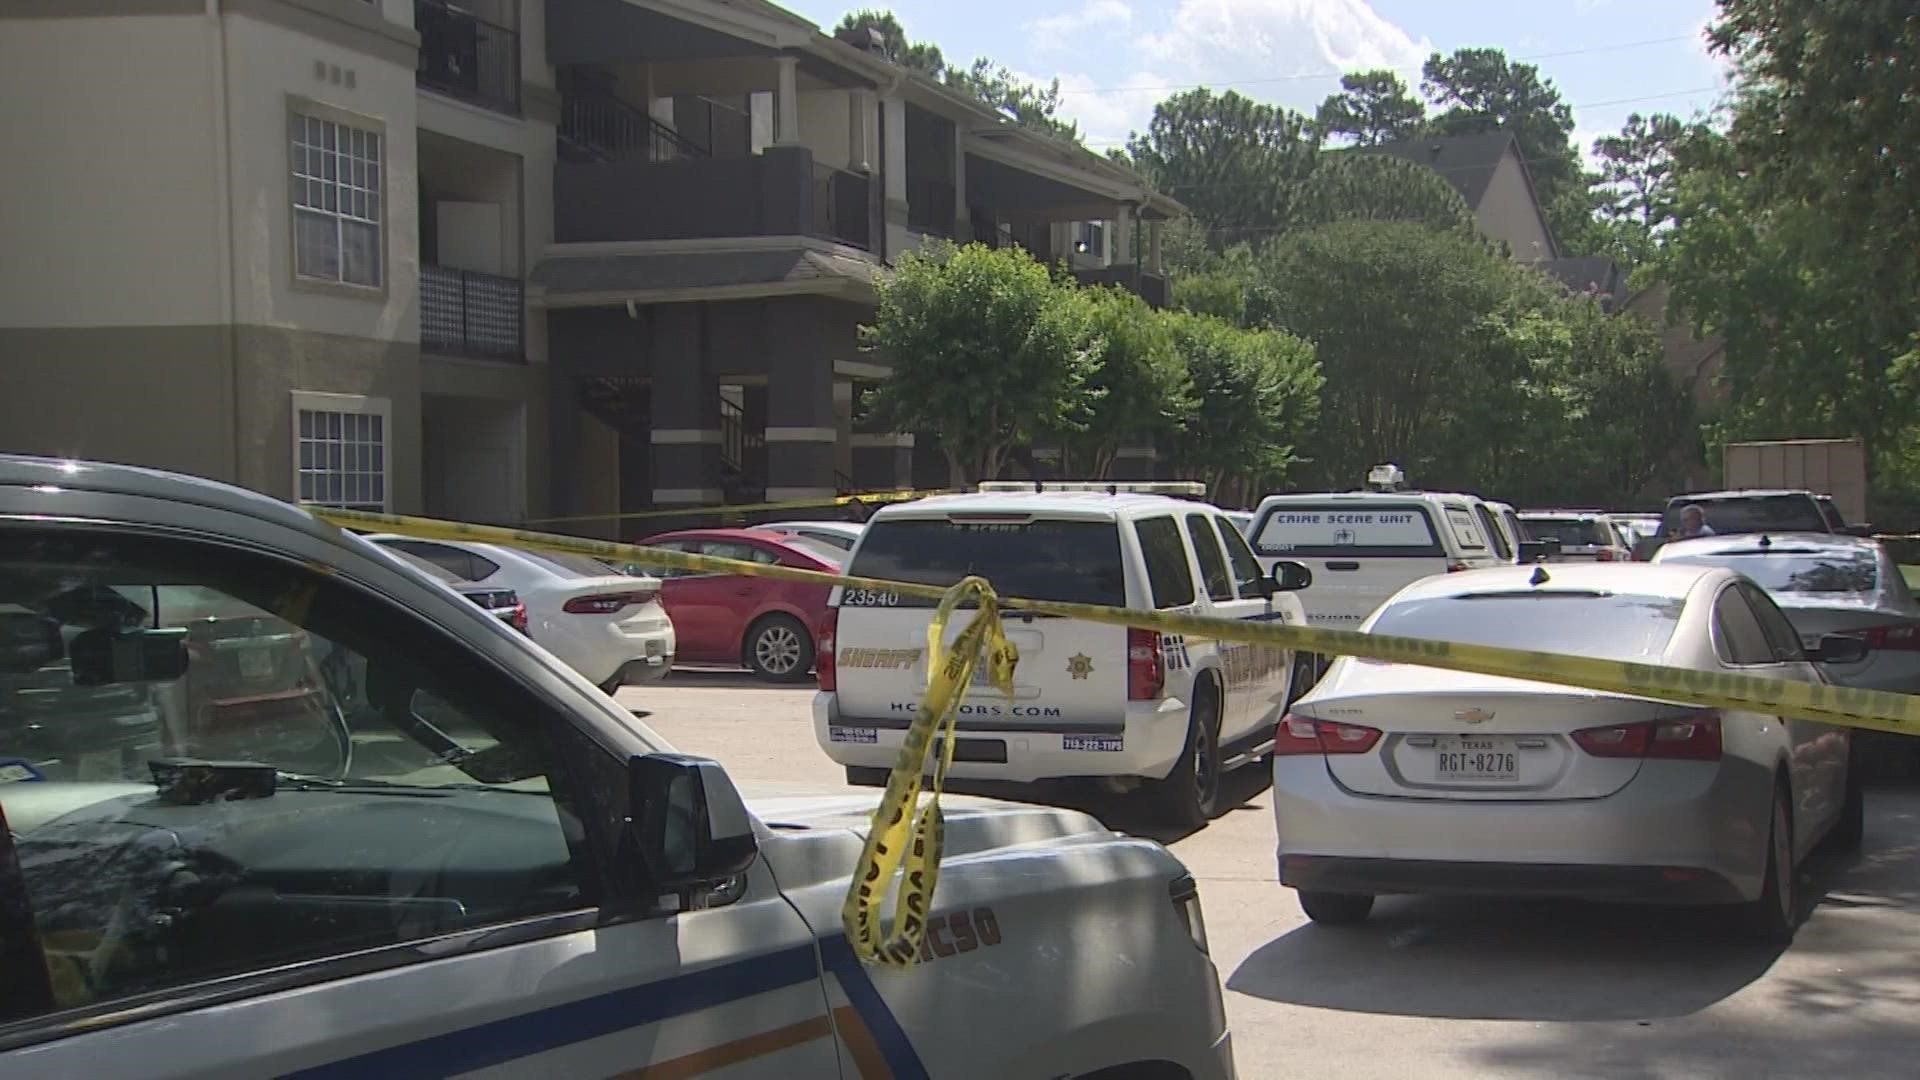 Four people were killed, including a 4-year-old girl, in an apparent murder-suicide Thursday in northwest Harris County, according to Sheriff Ed Gonzalez.